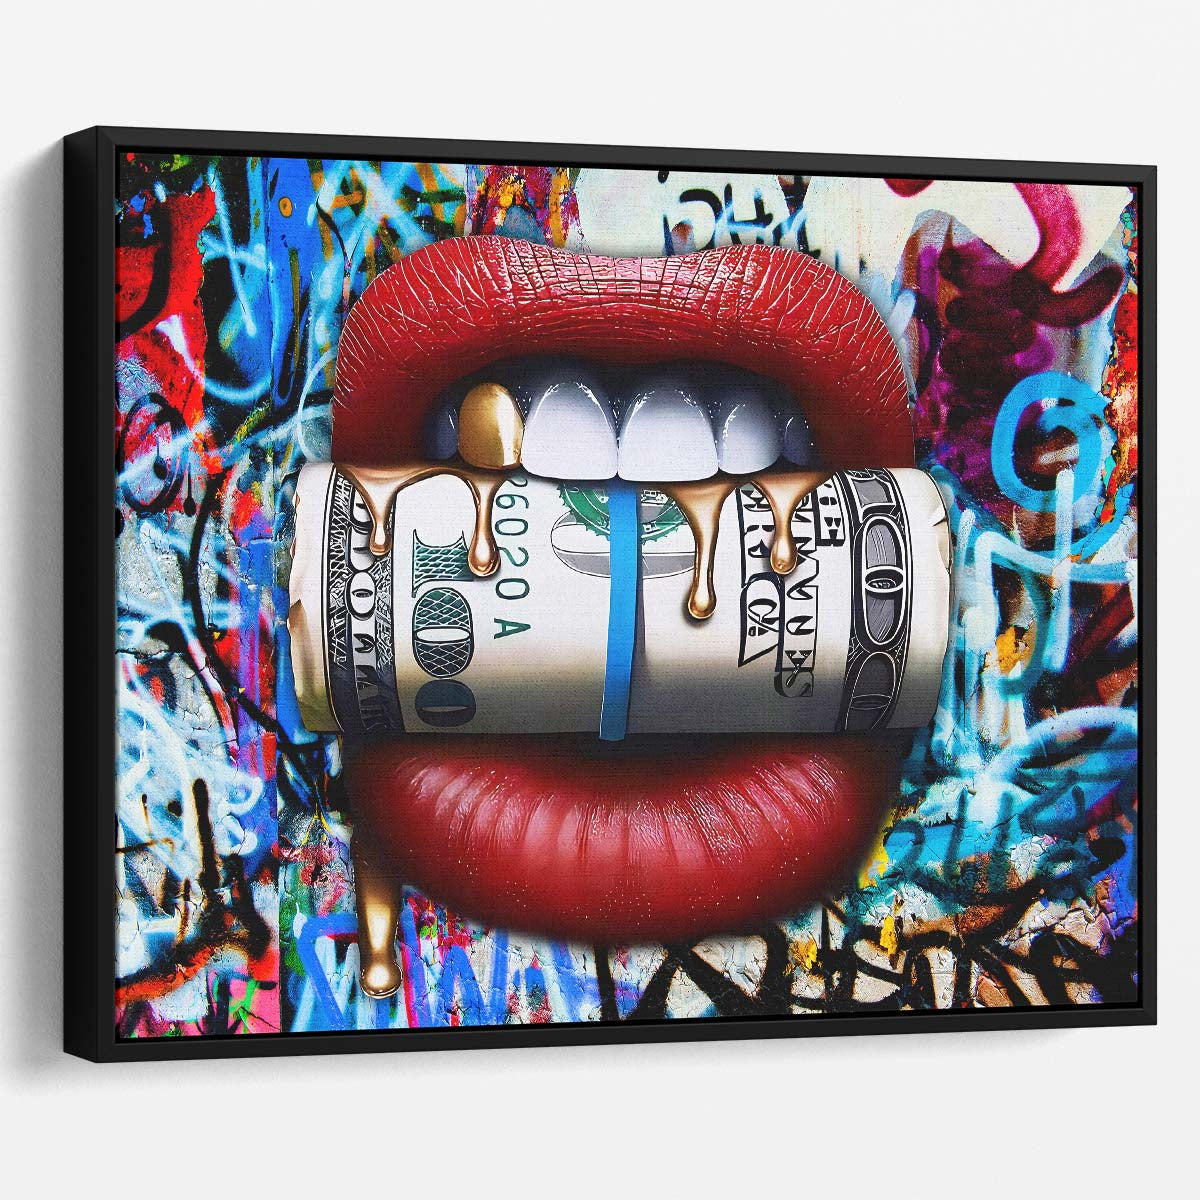 Dollars On My Lips Graffiti Wall Art by Luxuriance Designs. Made in USA.